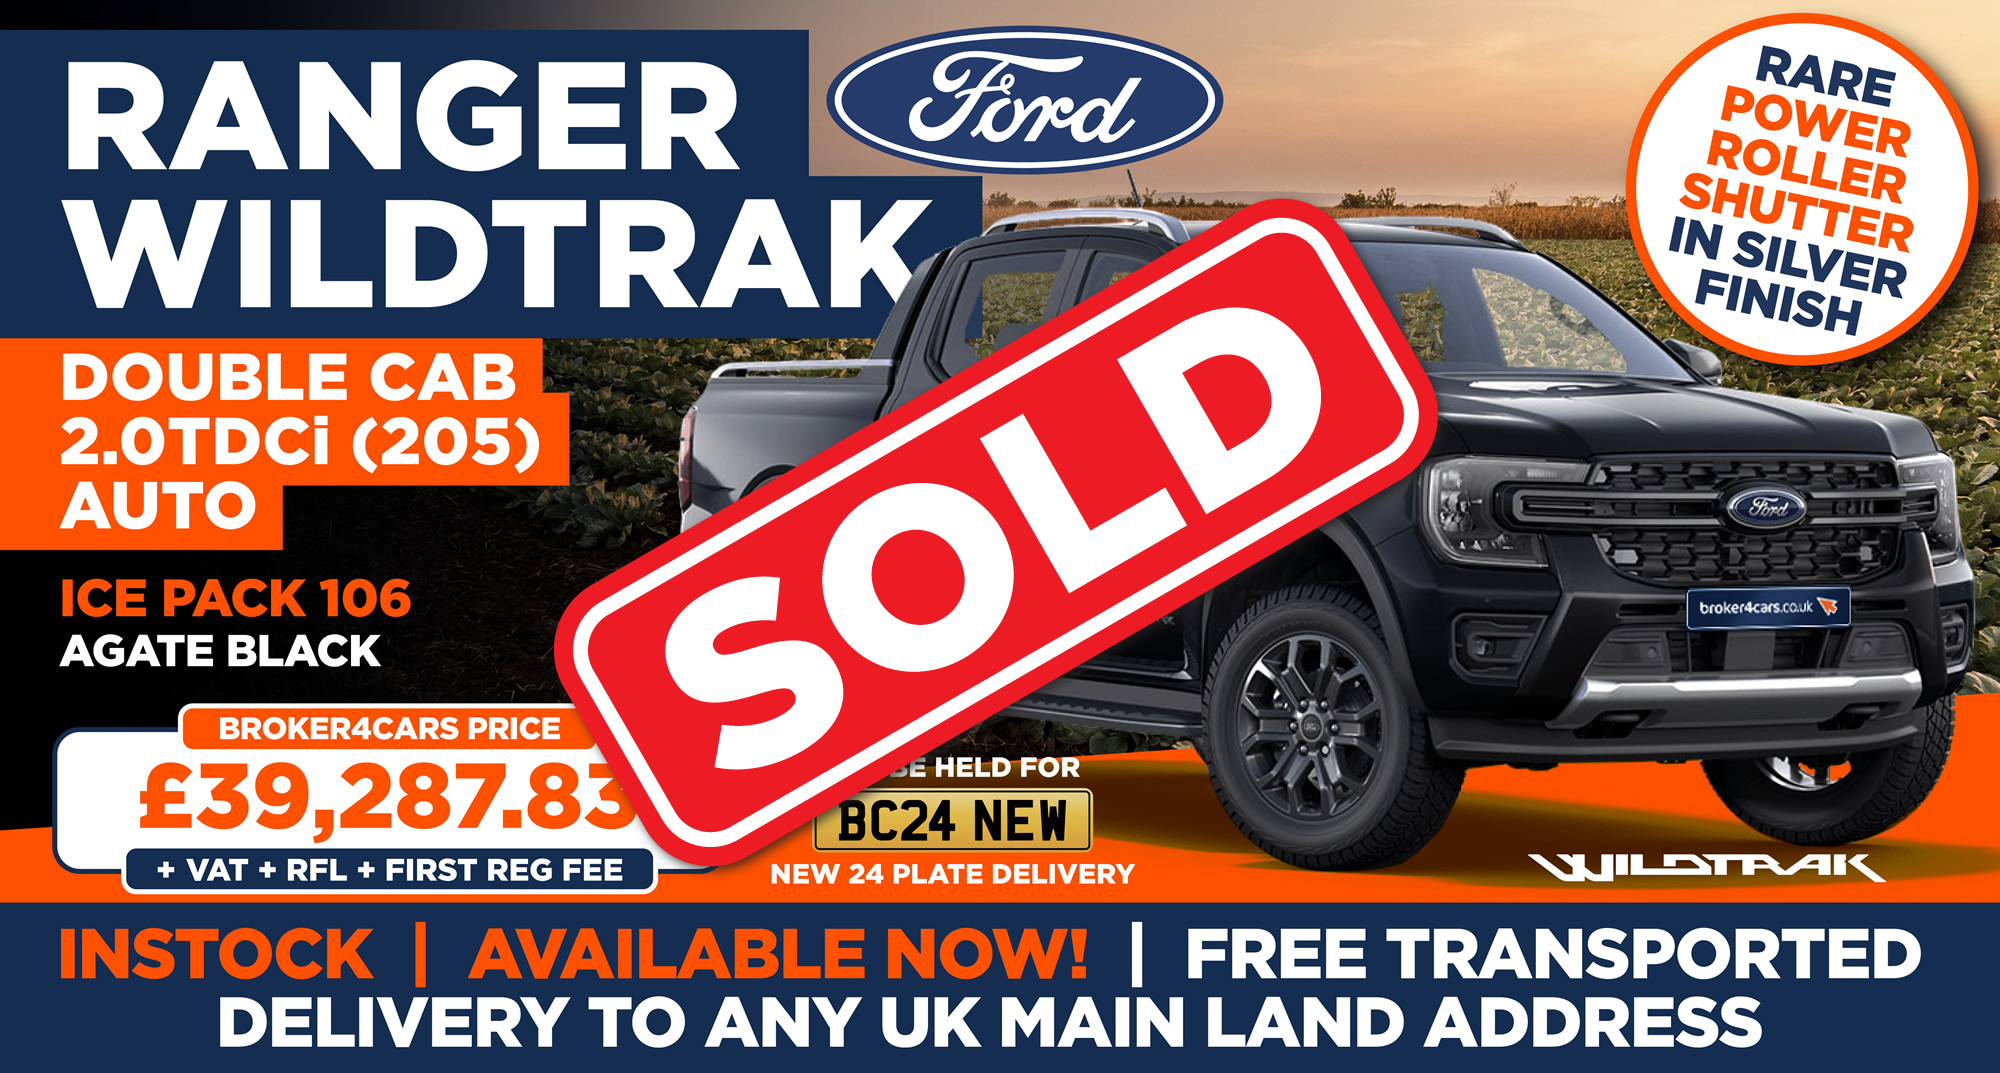 Ford Ranger Double Cab Wildtrak 2.0TDCi (205) AutoAgate Black, Power Roller Shutter, ICE Pack 106, In stock - can be held for March 24 plate delivery